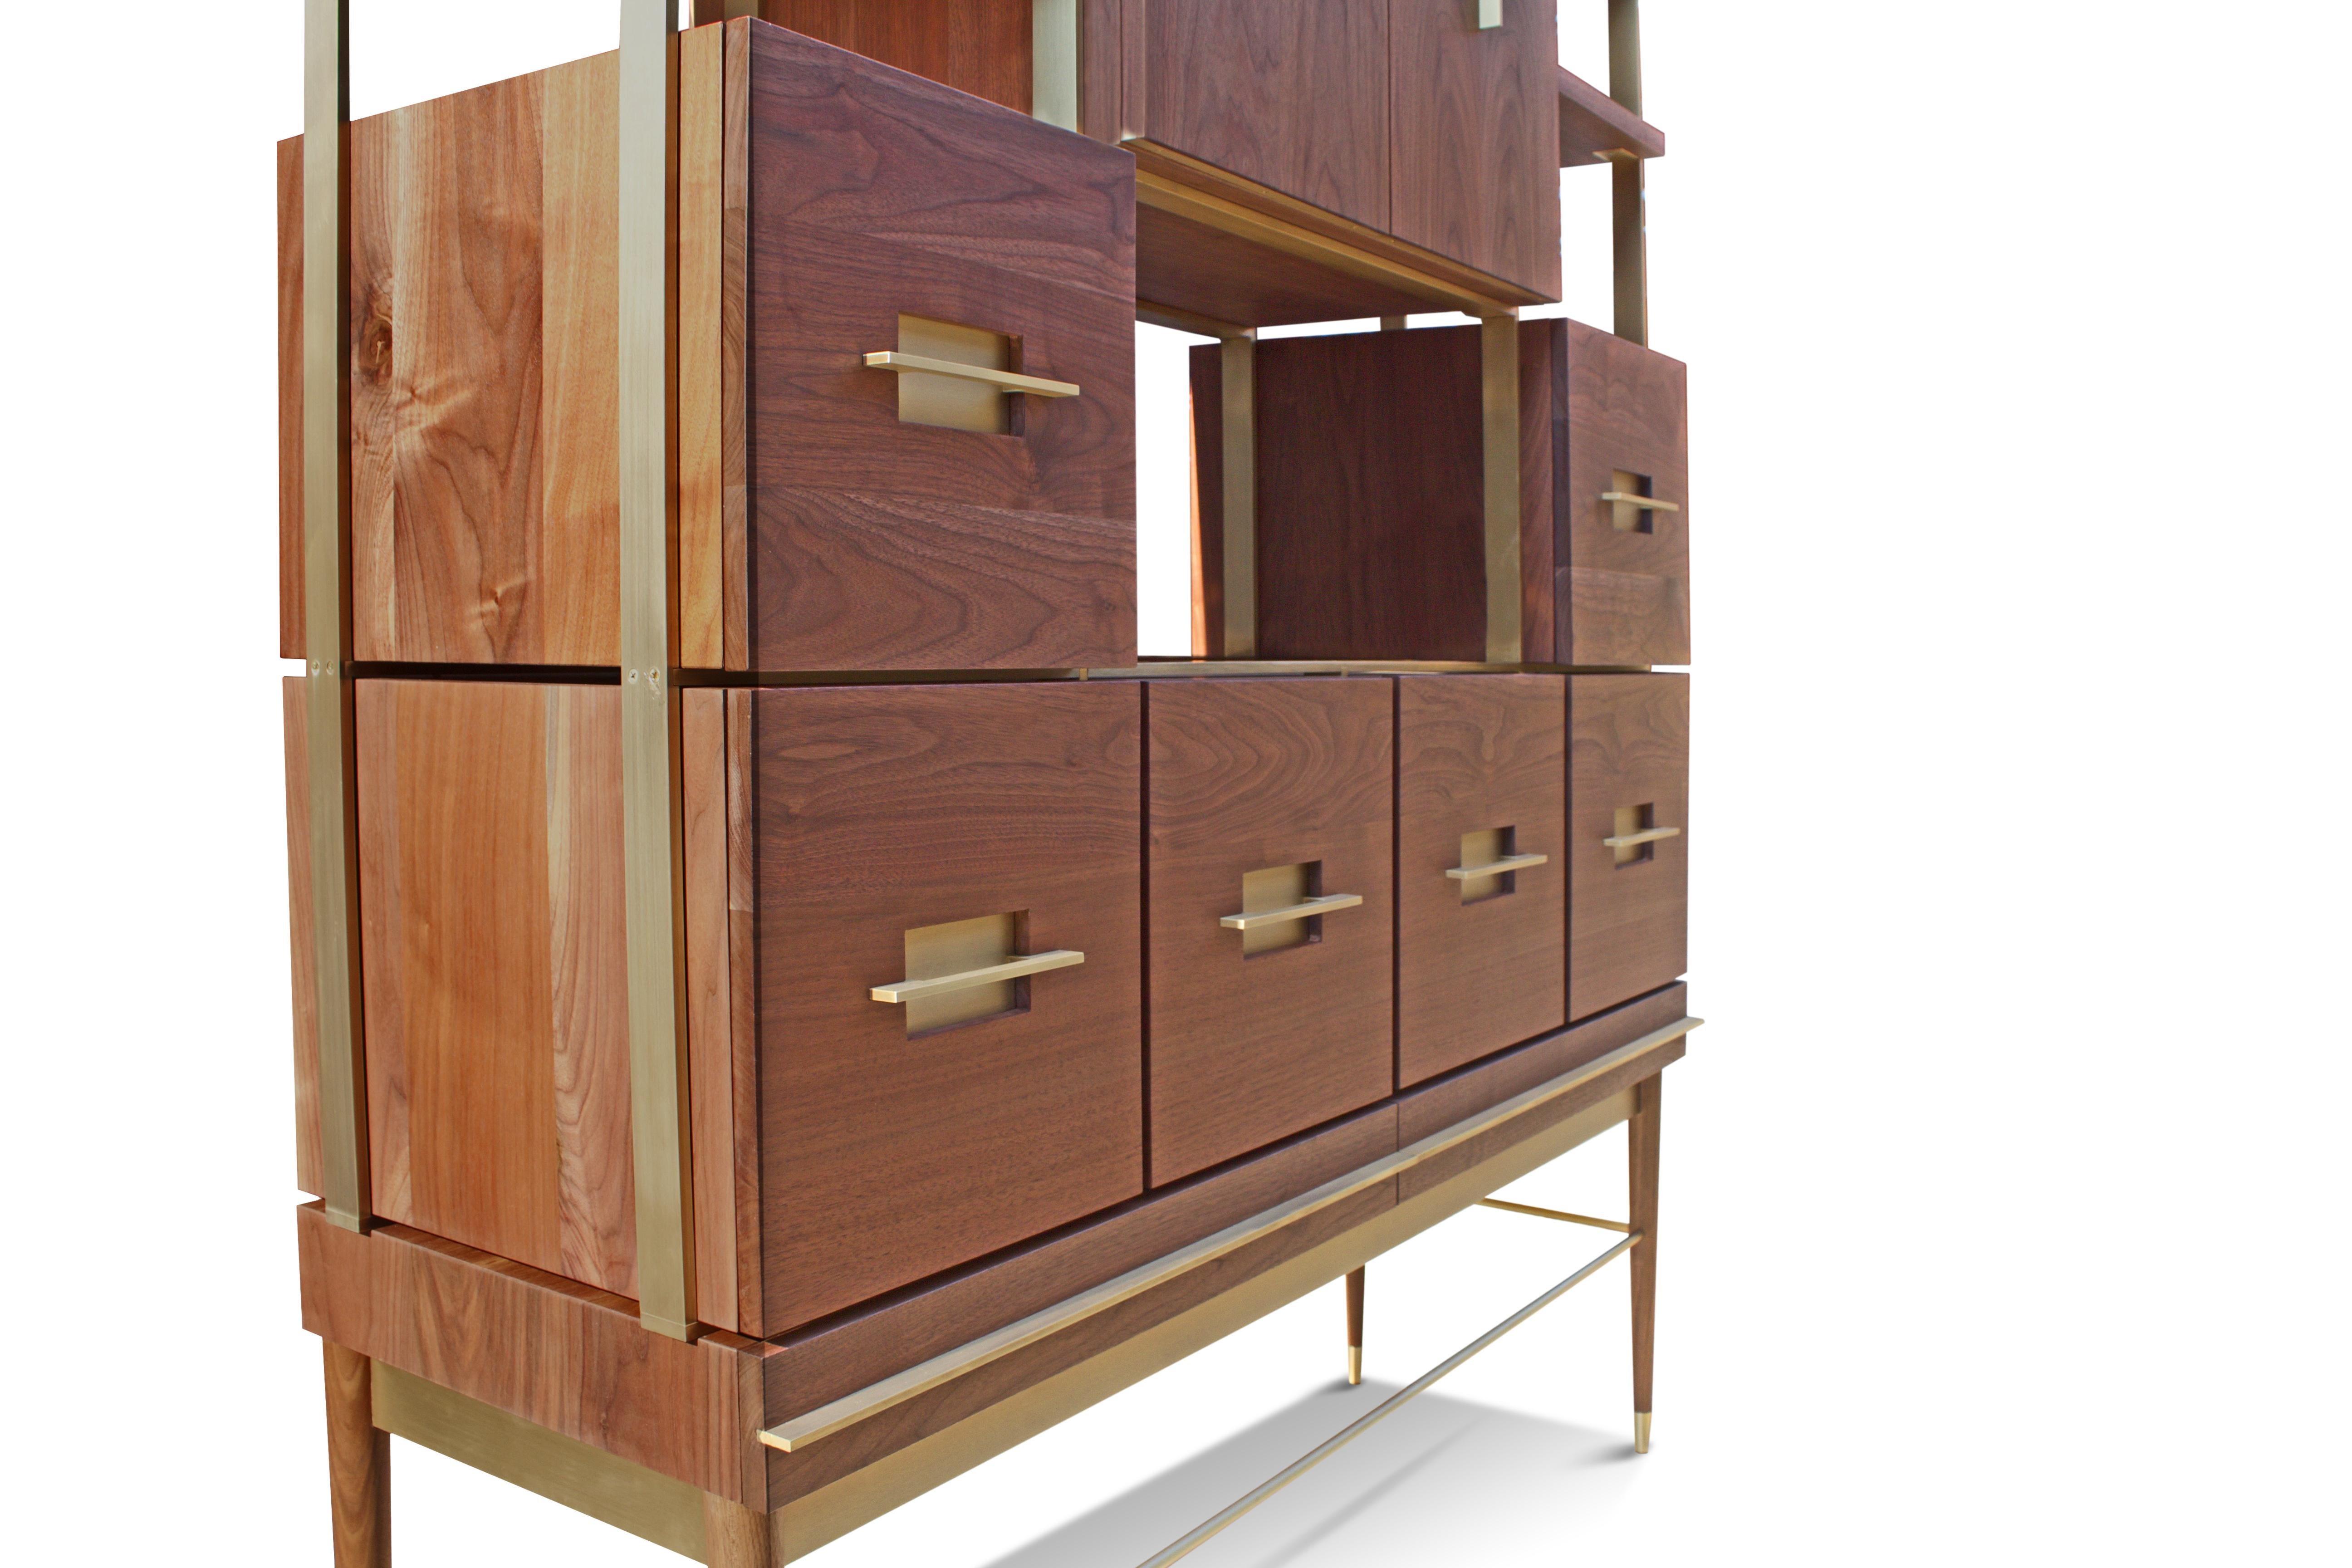 Walk in any room and your eyes are immediately drawn to this mid-modern filing cabinet. The juxtaposition between the delicate design of its legs and gorgeous American black walnut cabinetry will leaving you staring.